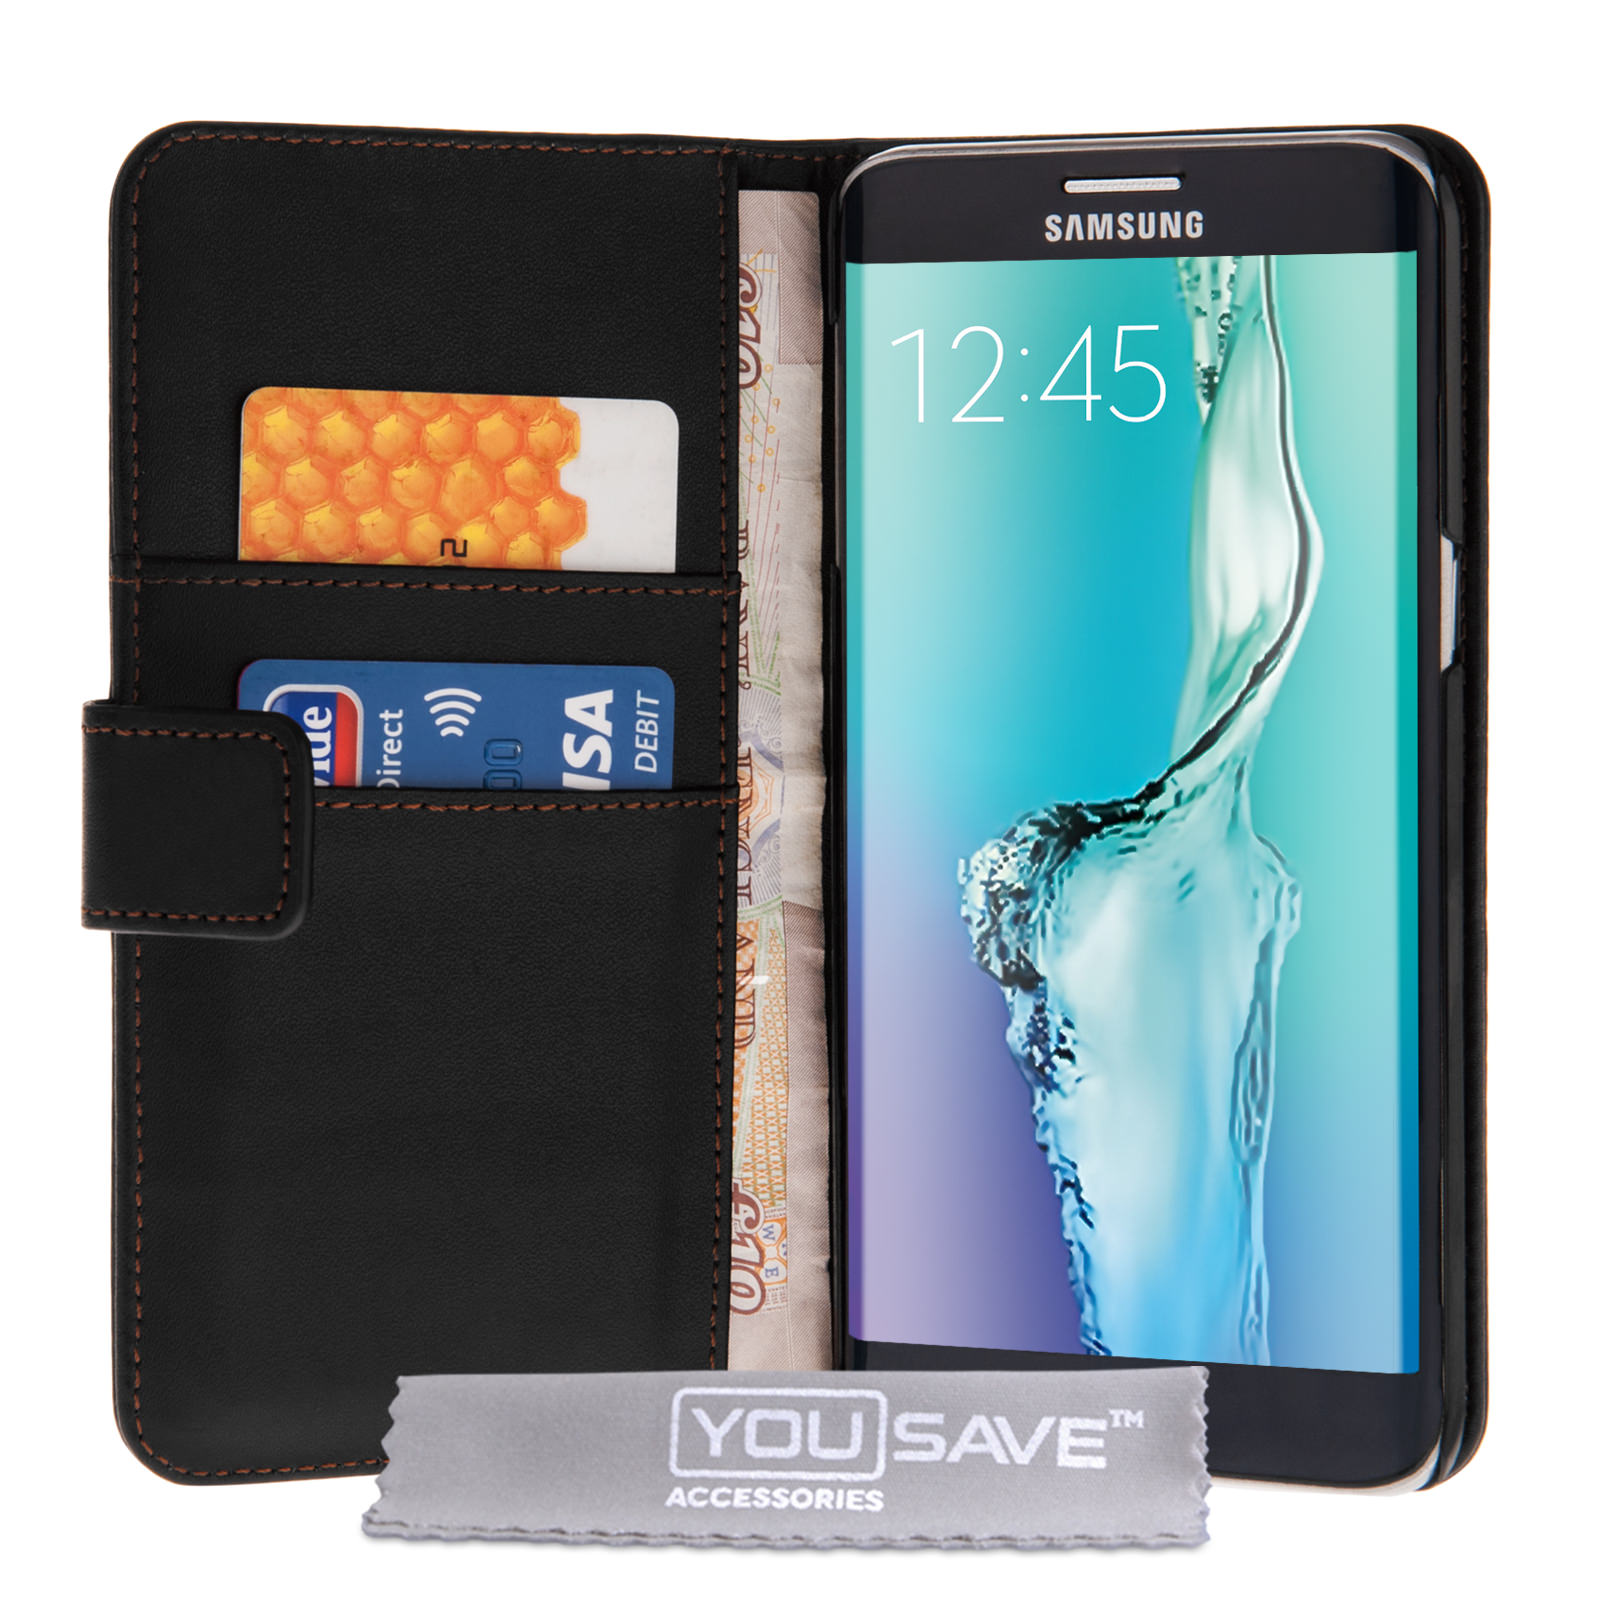 Yousave Accessories Samsung Galaxy S6 Edge Plus PU Leather Wallet Case -Black